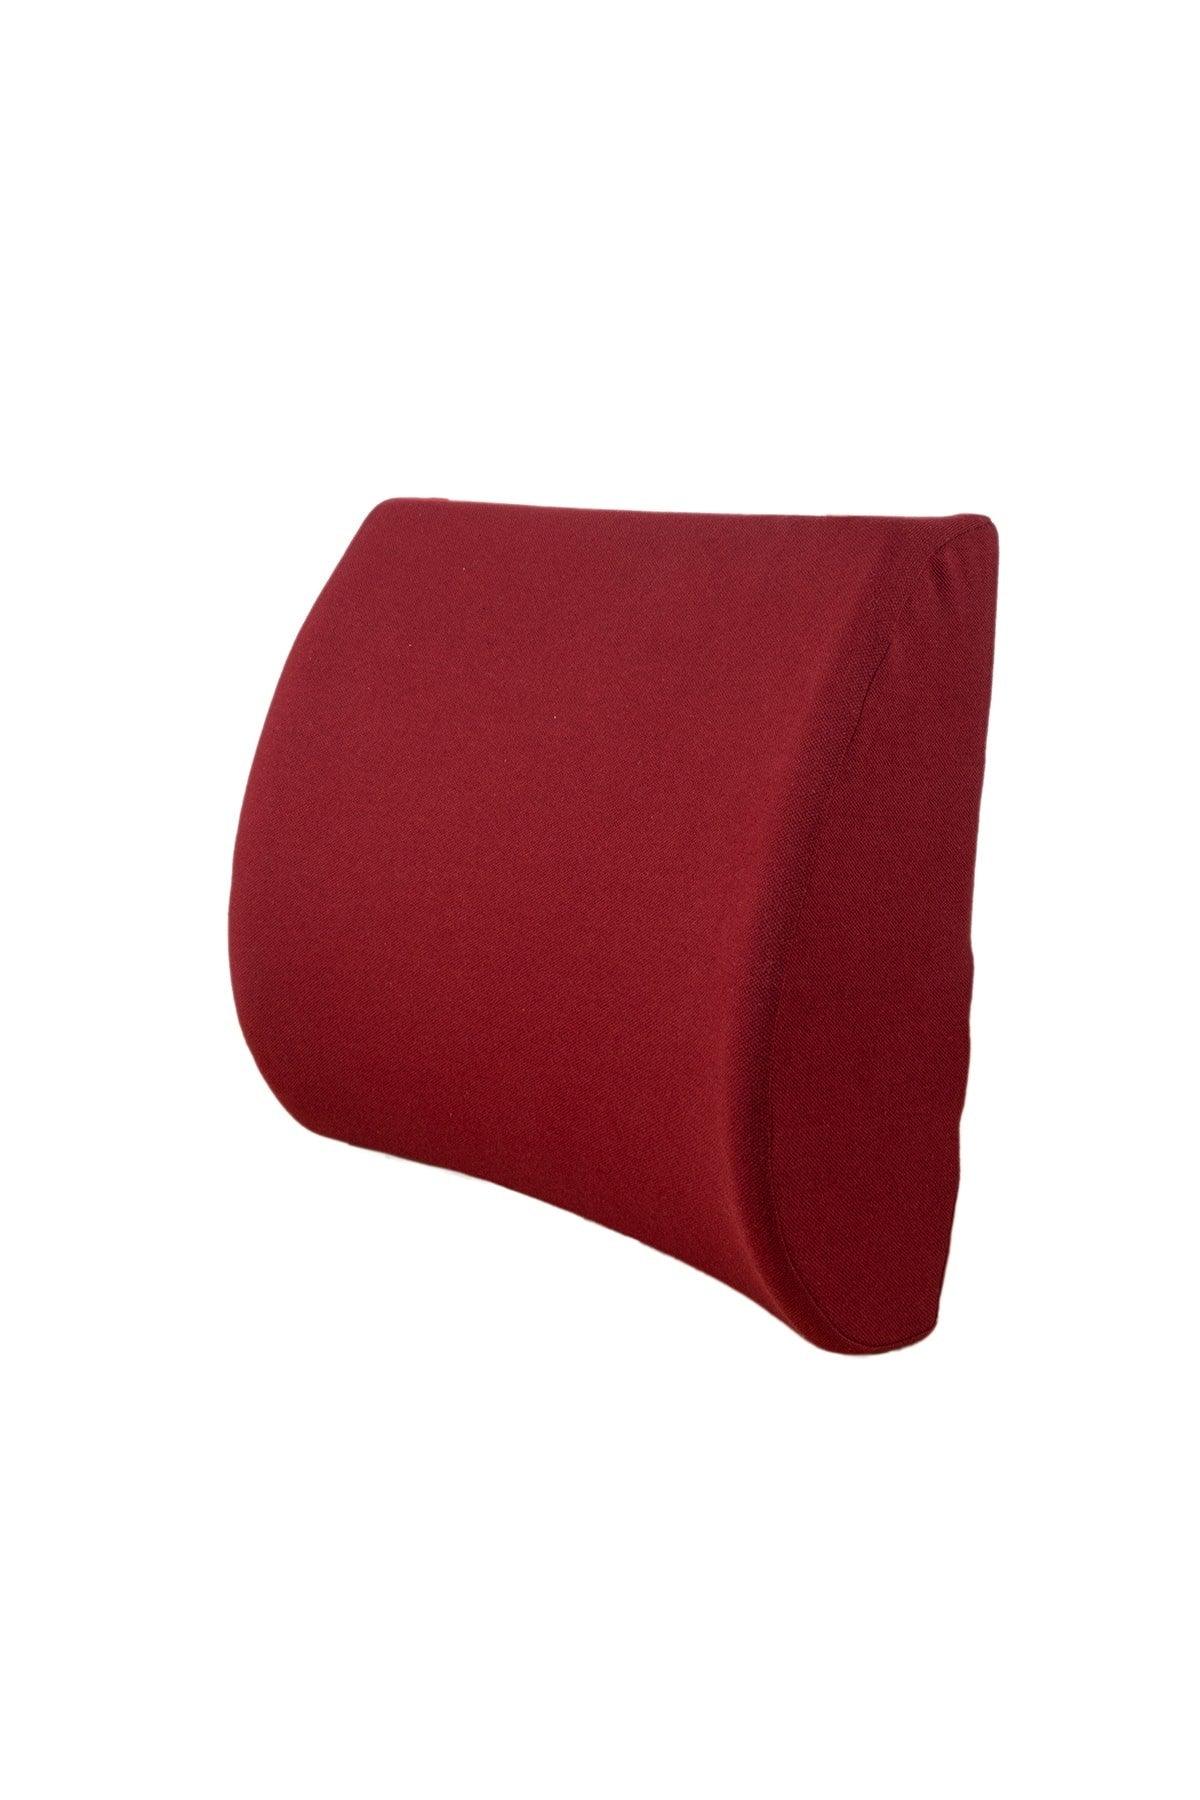 Visco Lumbar And Back Cushion Pillow Auto Vehicle Office Seat Back Lumbar Supporting Cushion Pillow Claret Red - Swordslife